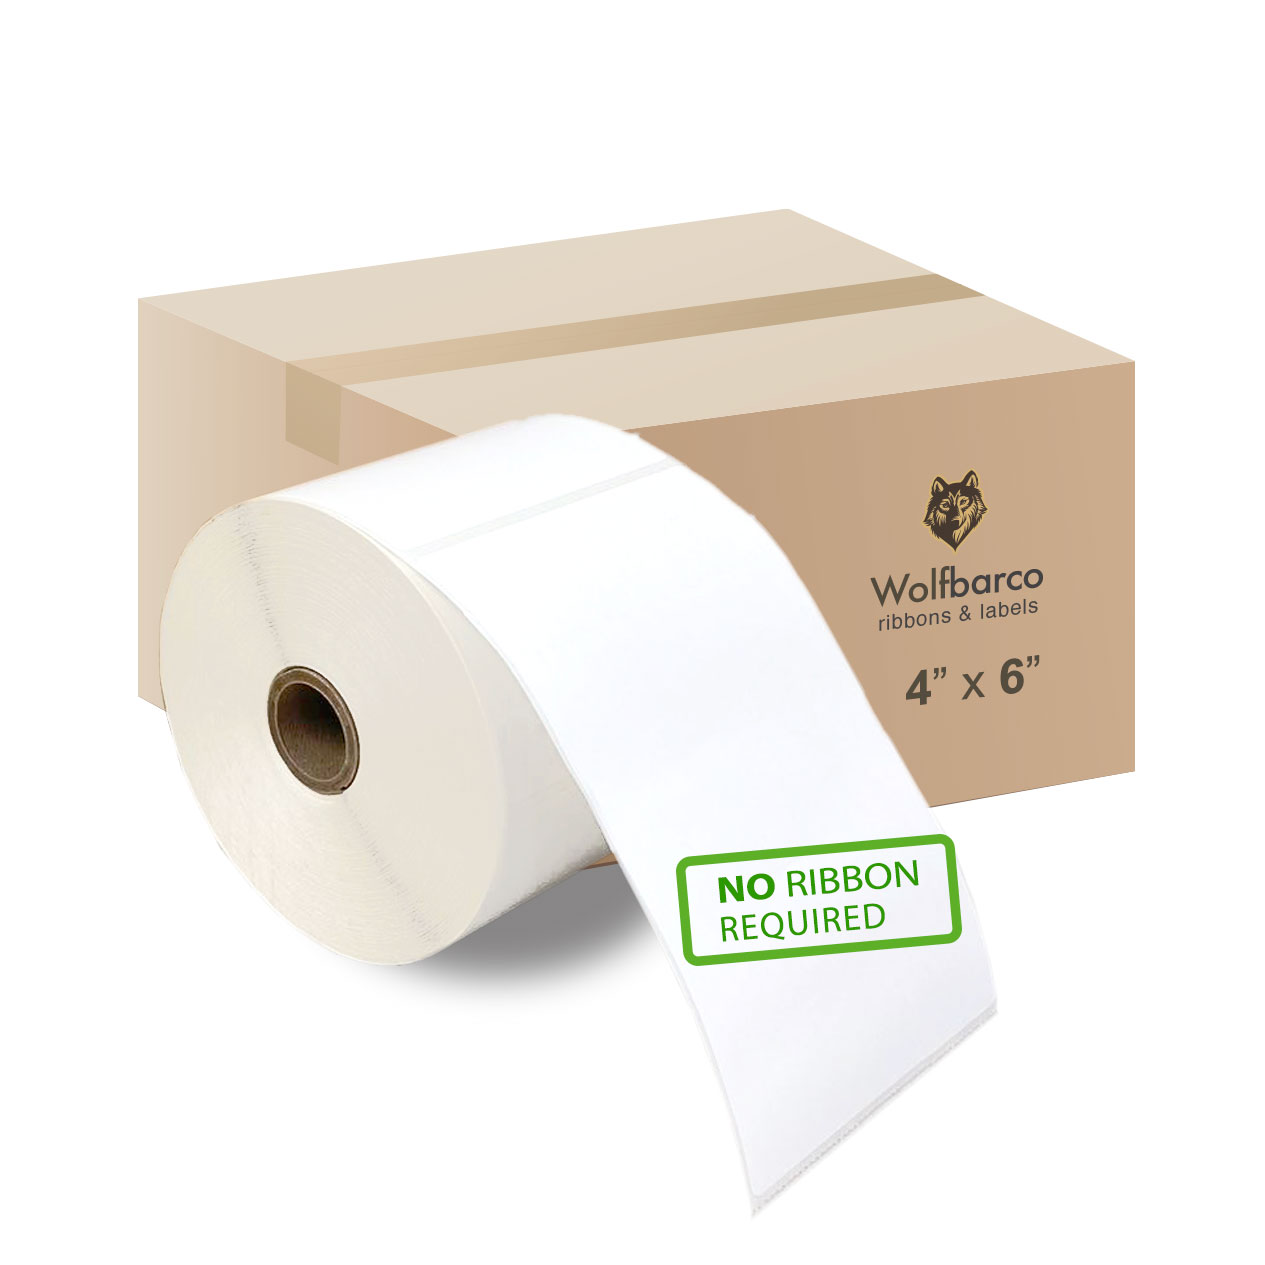 20 Rolls Direct Transfer Paper Label/Industrial Grade 4" x  6", with Perforation, 1"Core, 4" OD, 250 labels per Roll - White, Compatible with Zebra, Godex and other printers